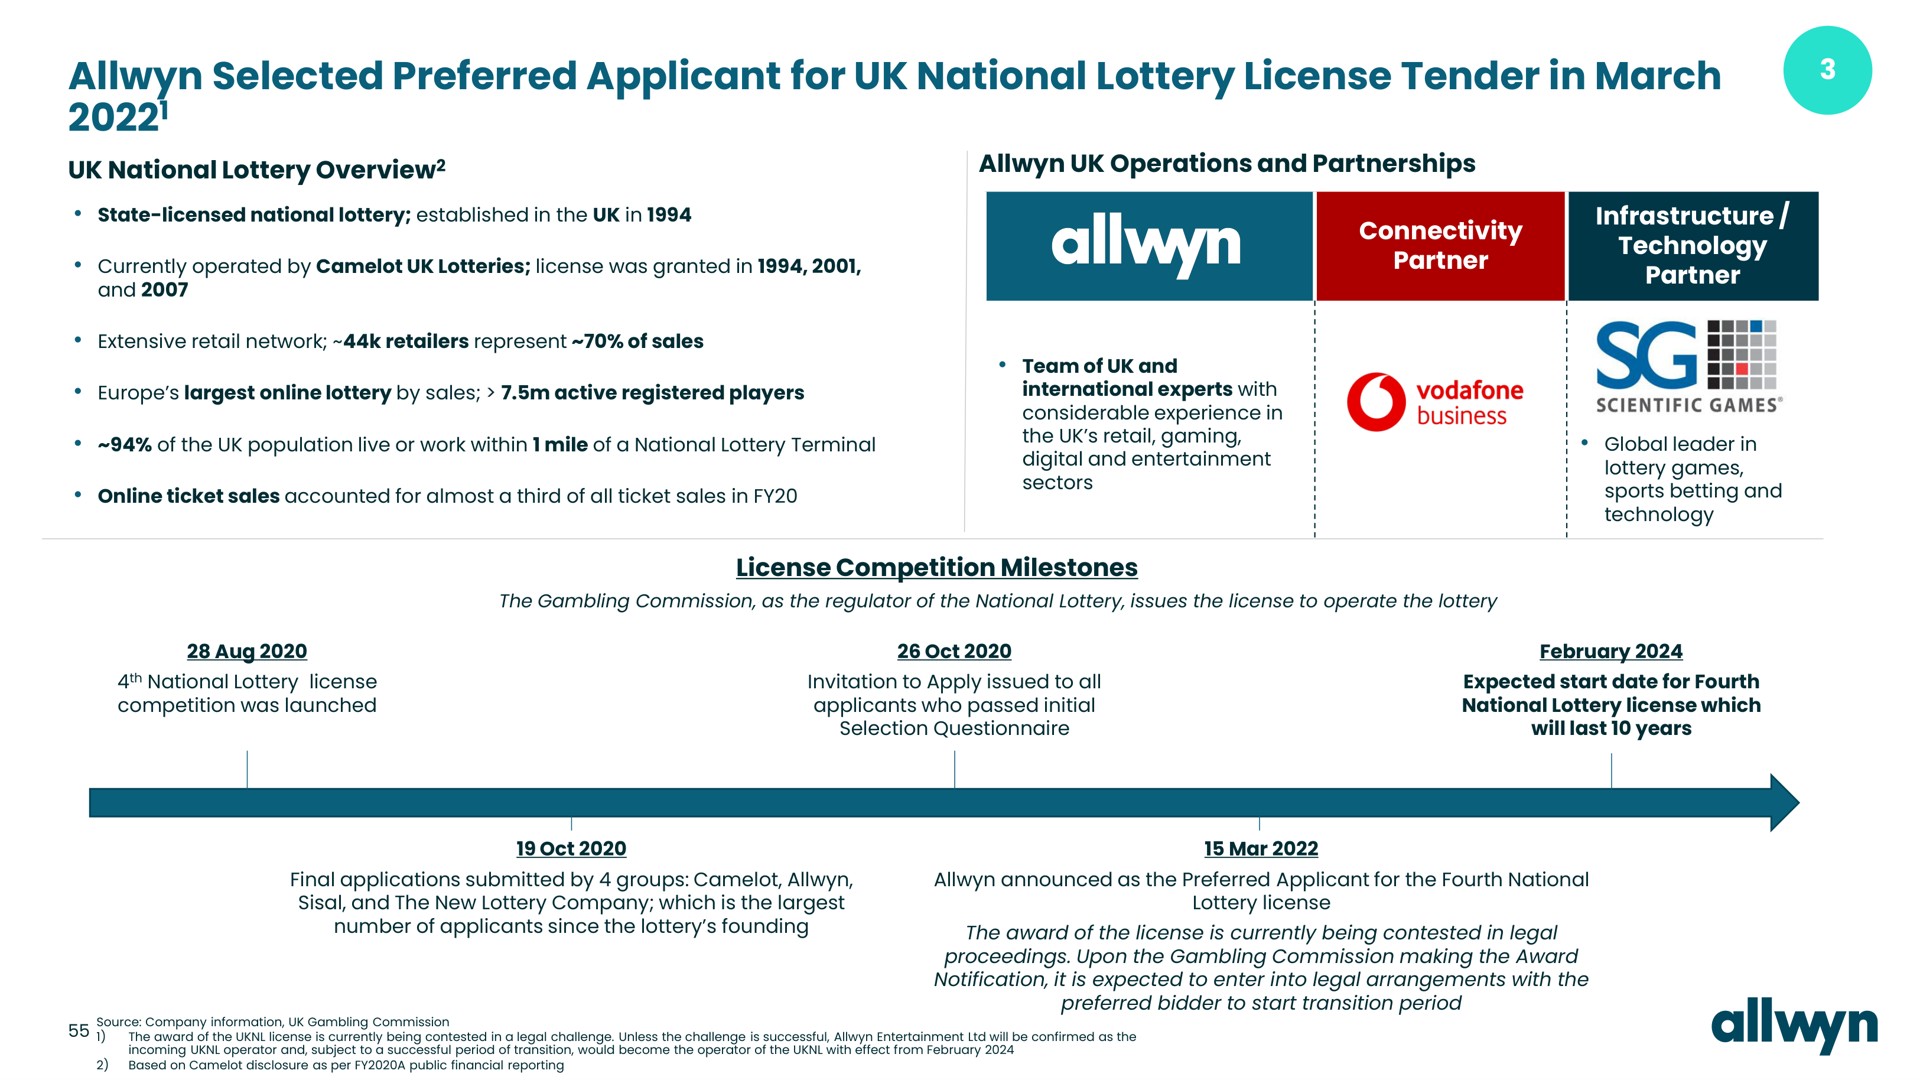 selected preferred applicant for national lottery license tender in march | Allwyn